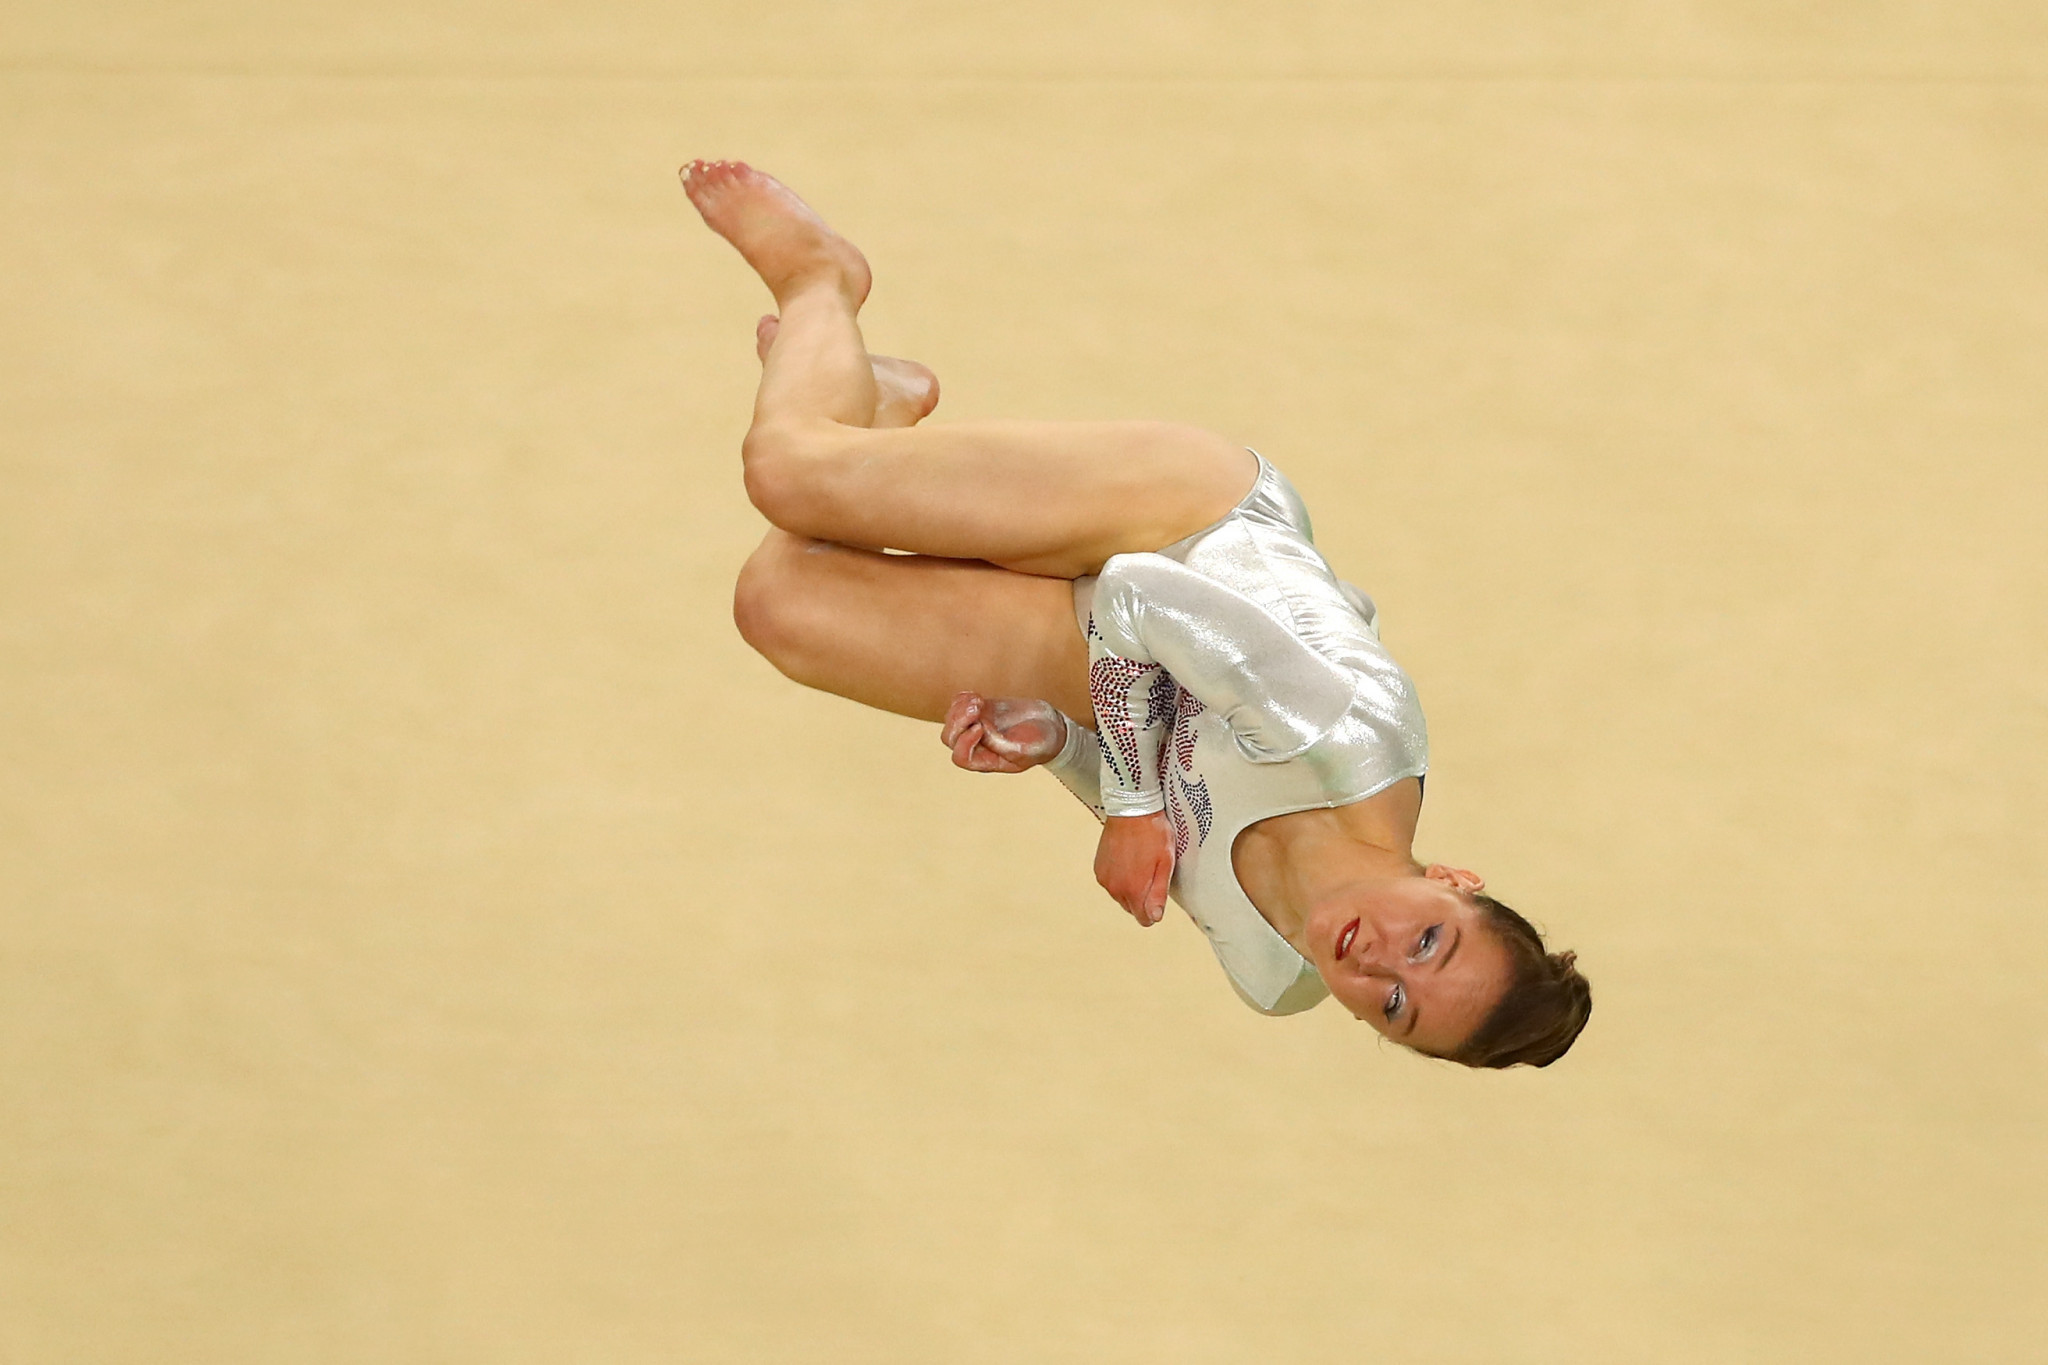 Amy Tinkler won floor bronze at the Rio 2016 Olympics ©Getty Images